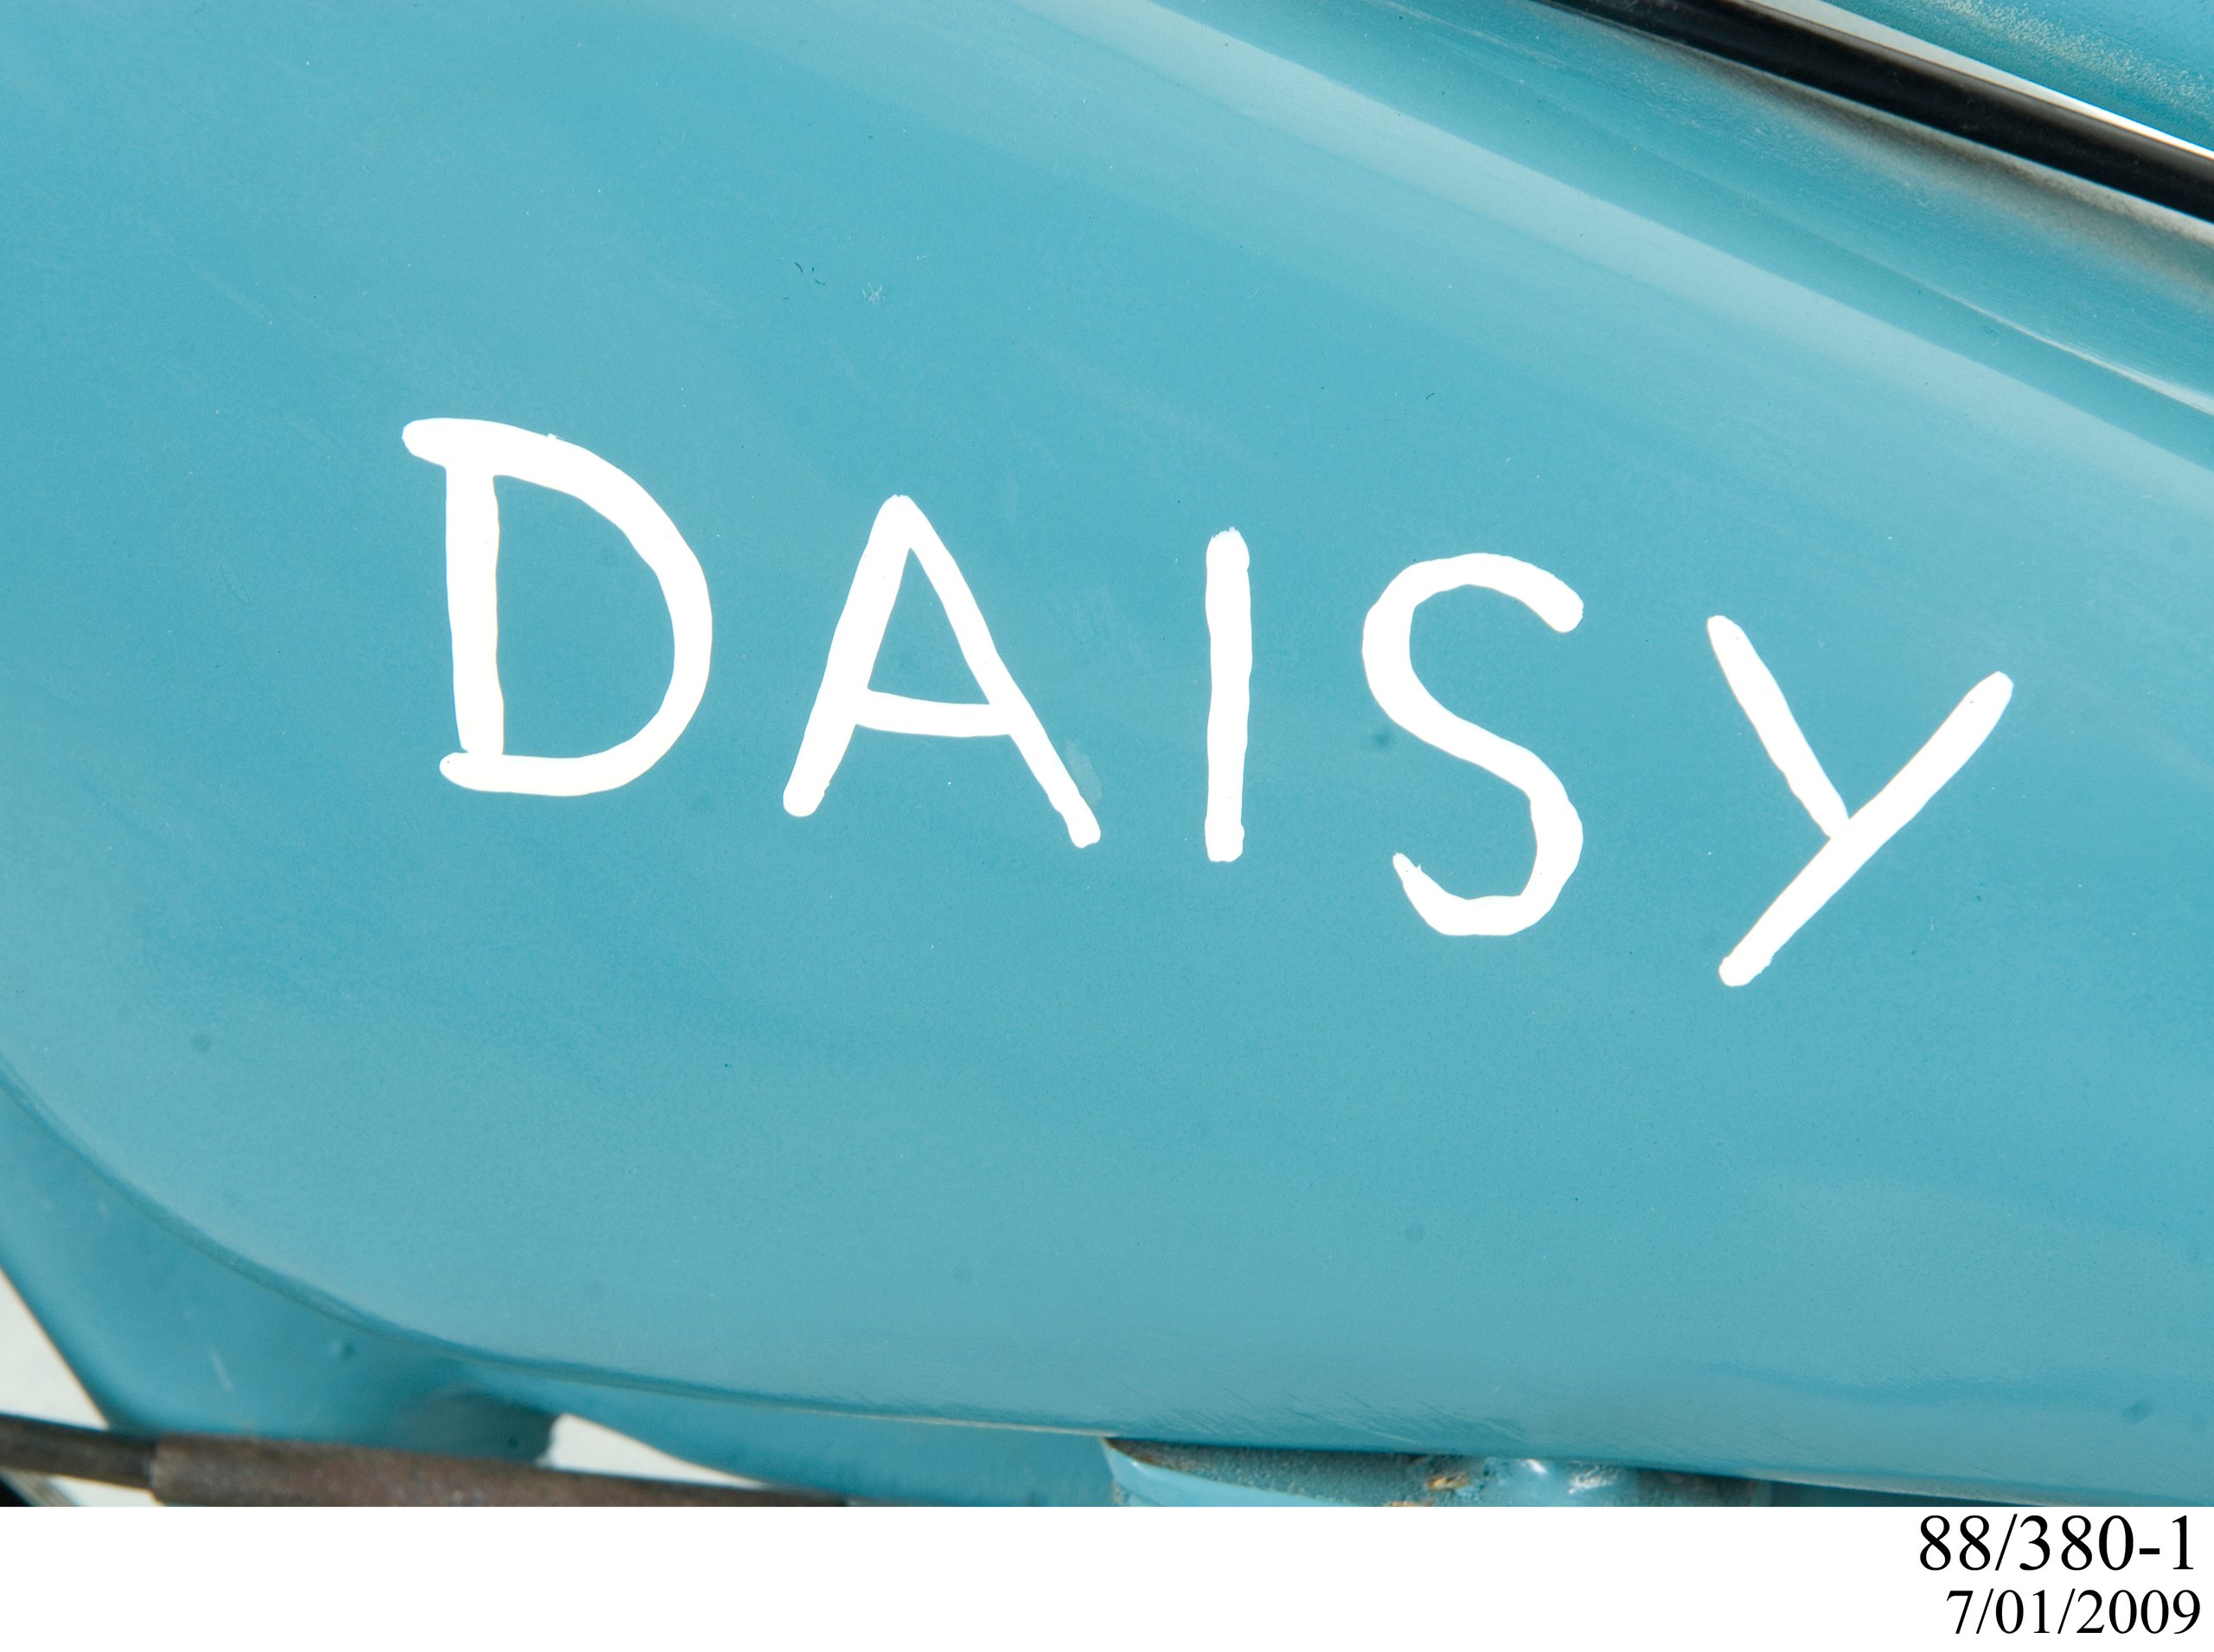 Ray Taylor's speedway motorcycle "Daisy" by Martin/JAP